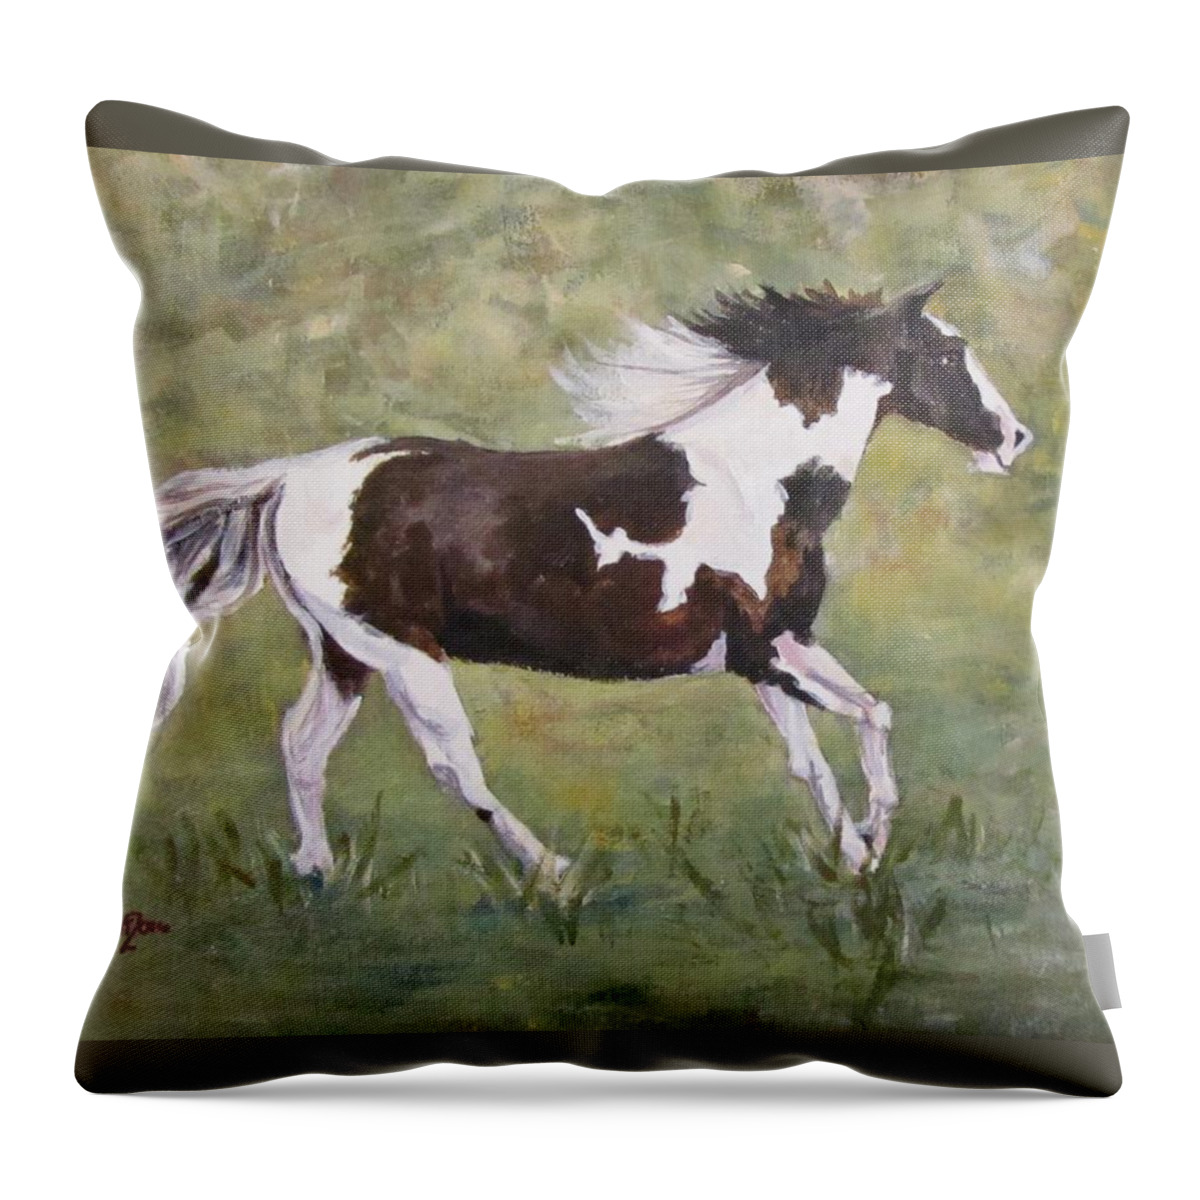 Horse Throw Pillow featuring the painting The Mare by Barbara O'Toole